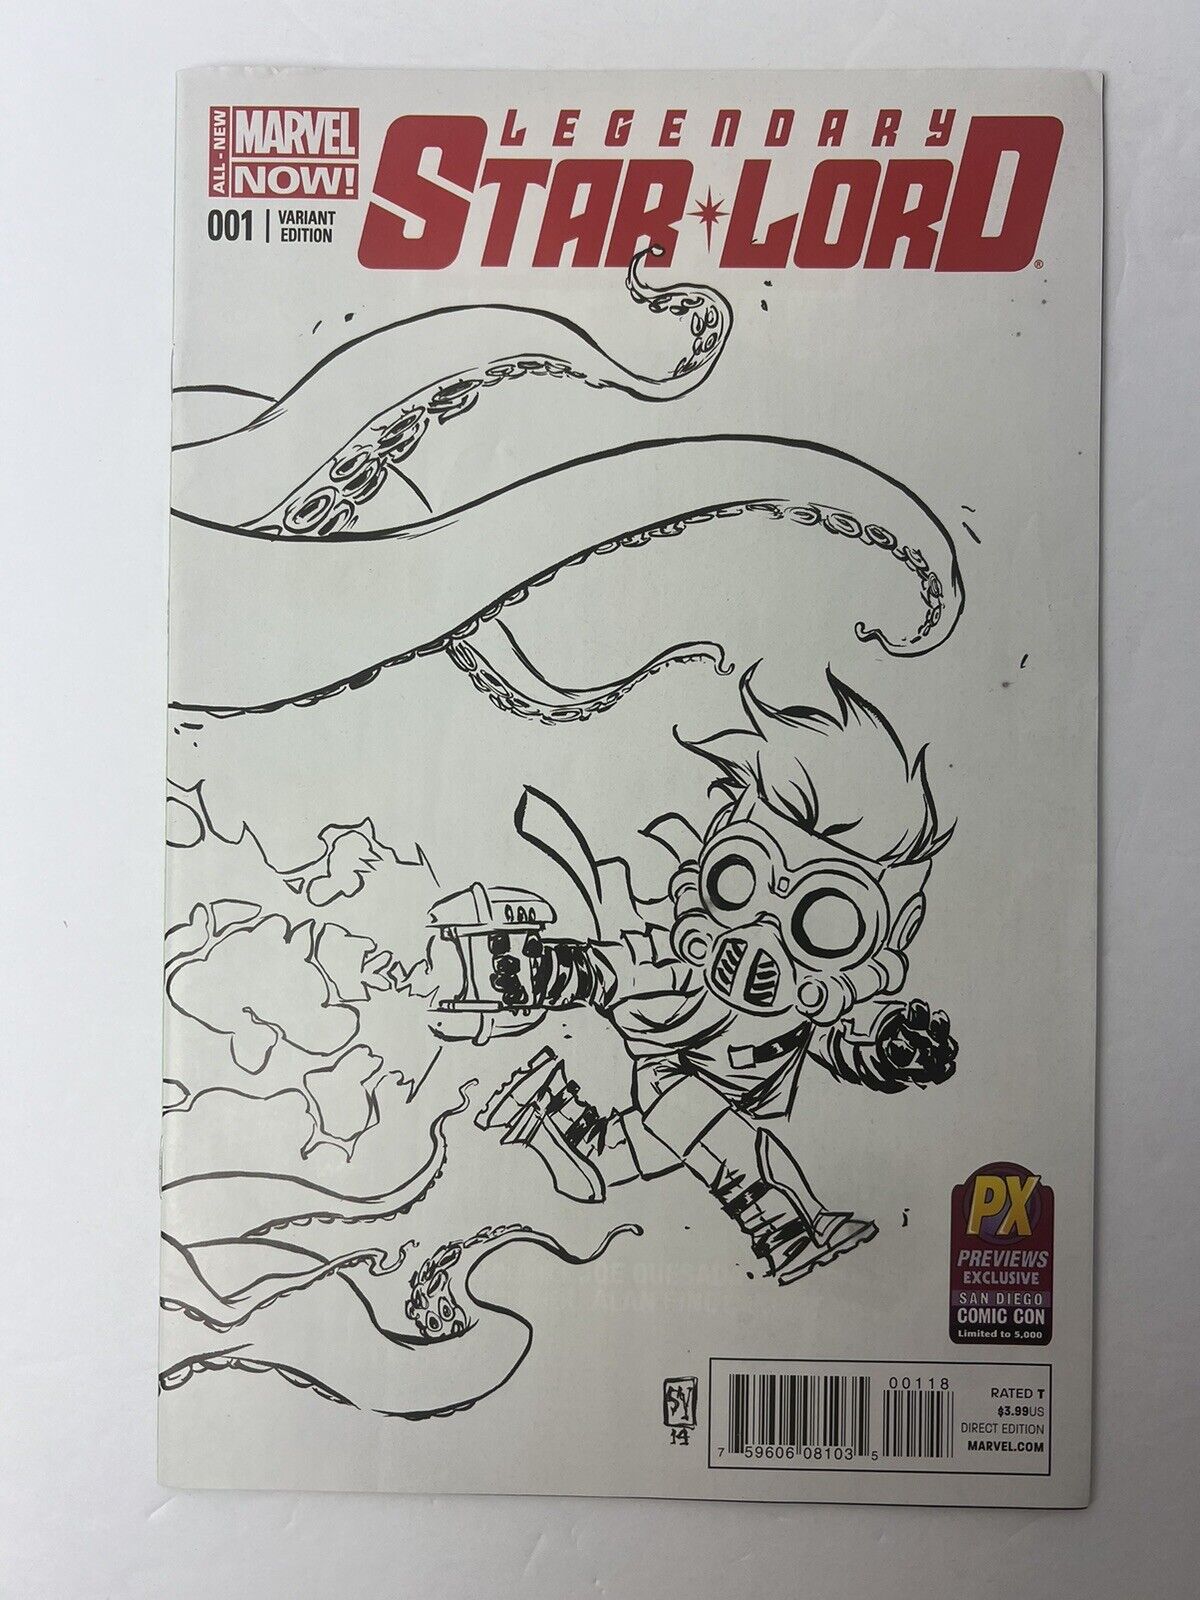 Legendary Star Lord #1 SSCC 2014 PX Previews Exclusive Sketch Variant